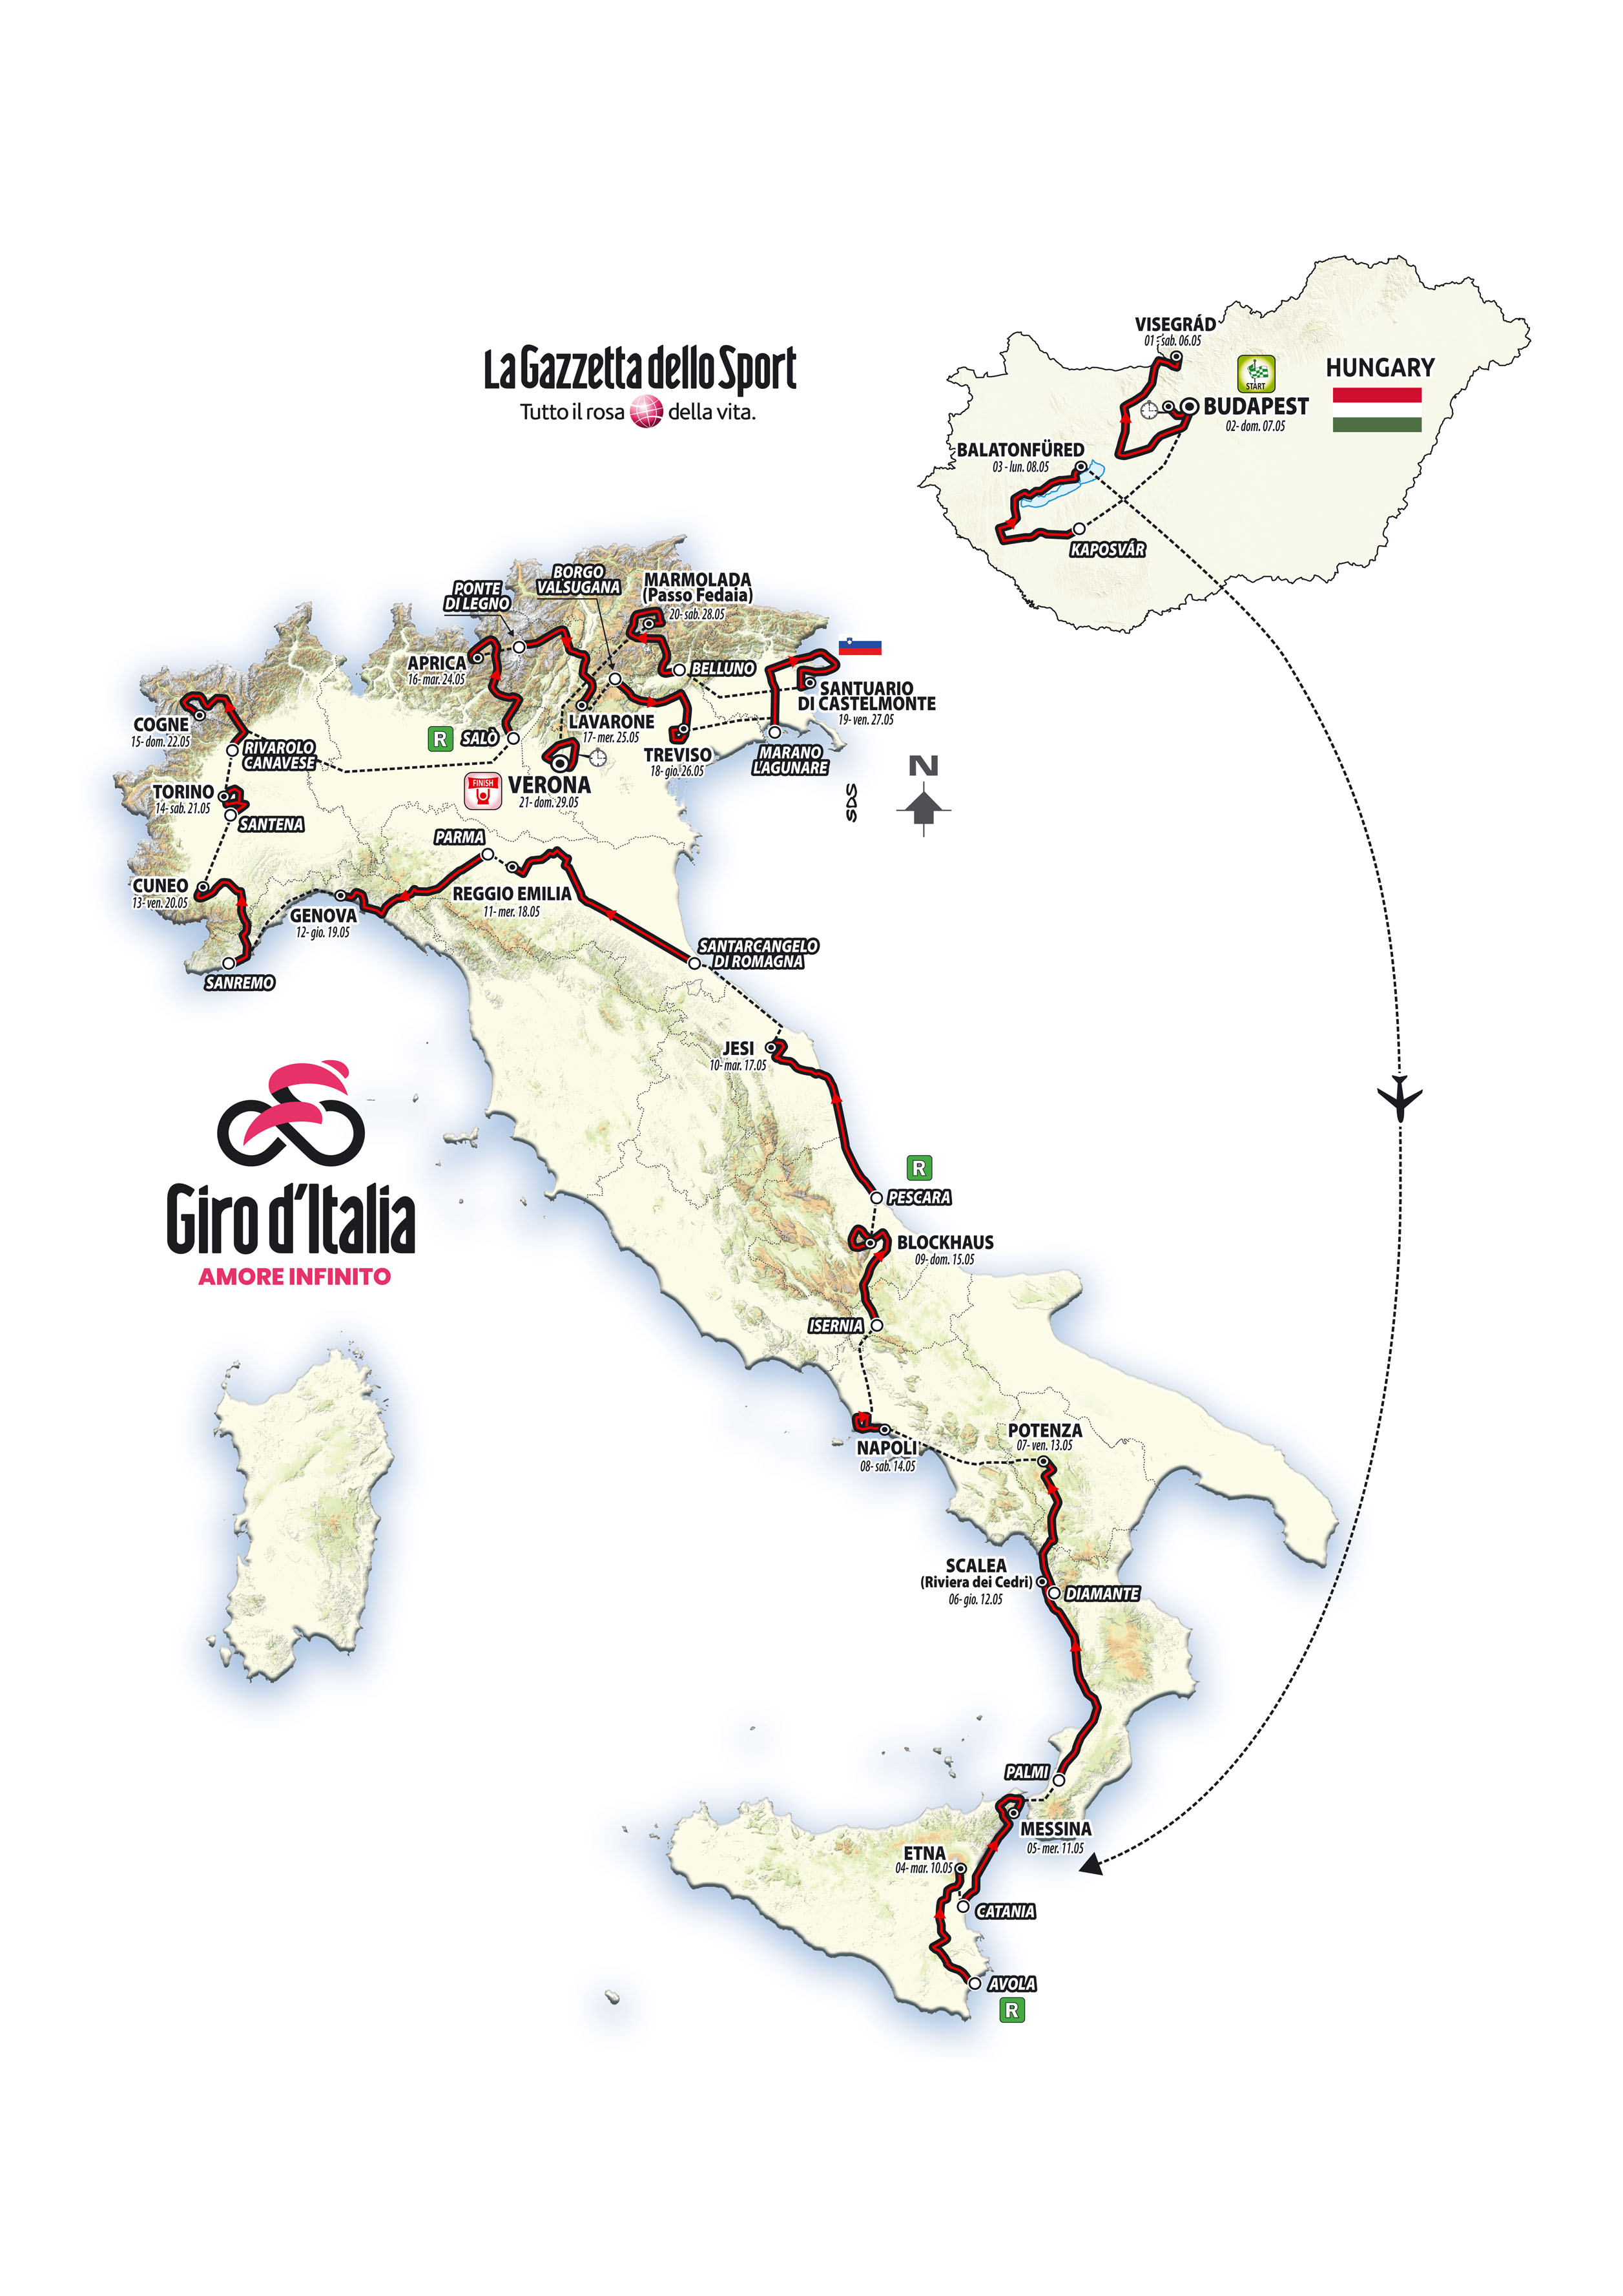 2022 Giro d'Italia: Full race route confirmed with just 26km of time  trialing | Cyclingnews